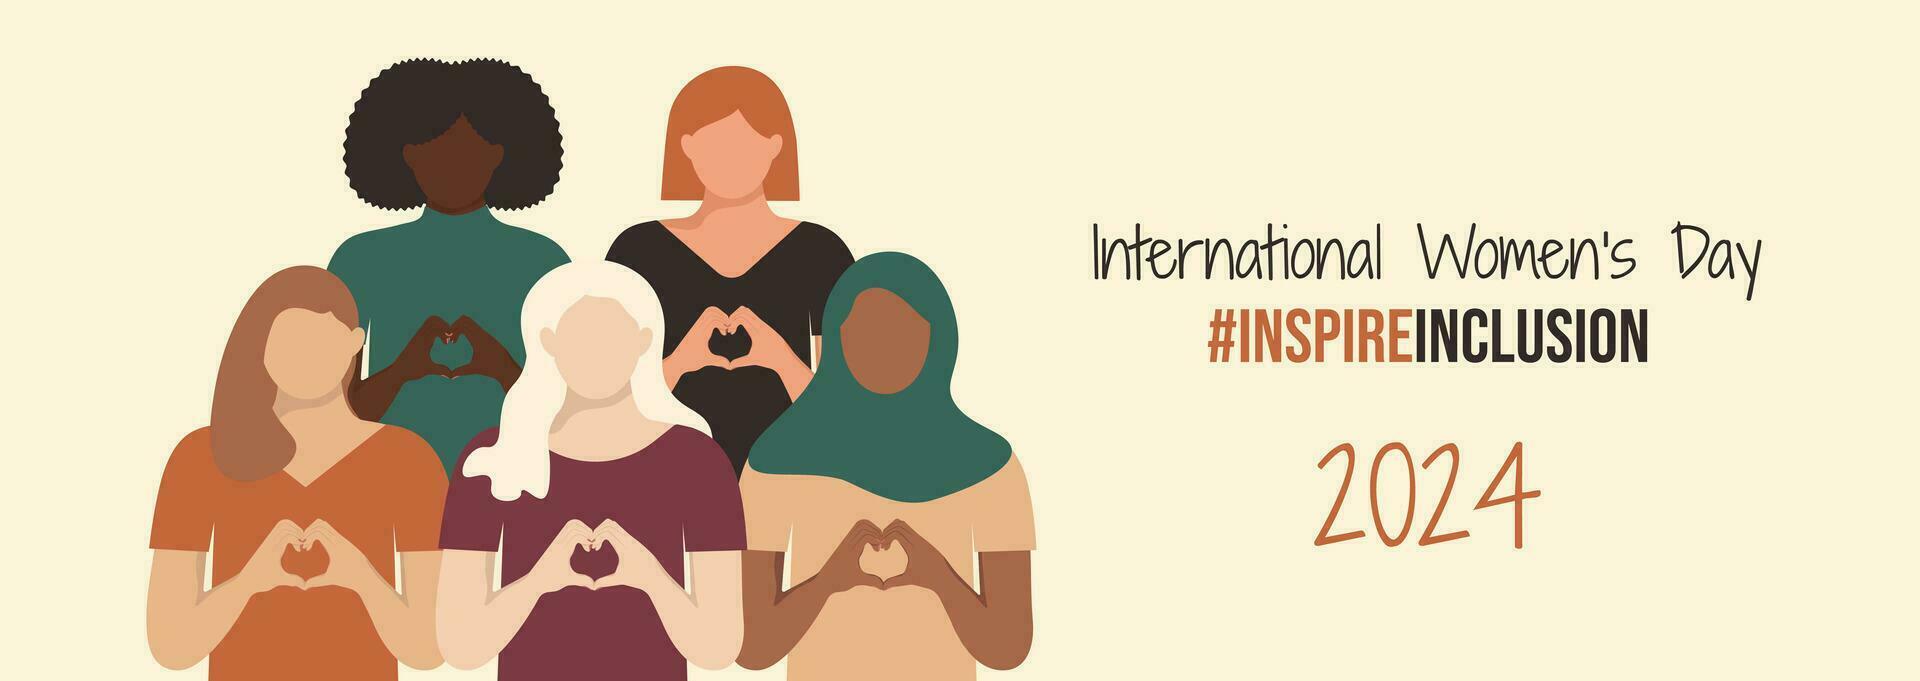 A banner of cartoon images doing a heart symbol with their hands, women of all cultures and colours, with the words international womens day, inspire inclusion, 2024, copied to the right of the cartoon women.